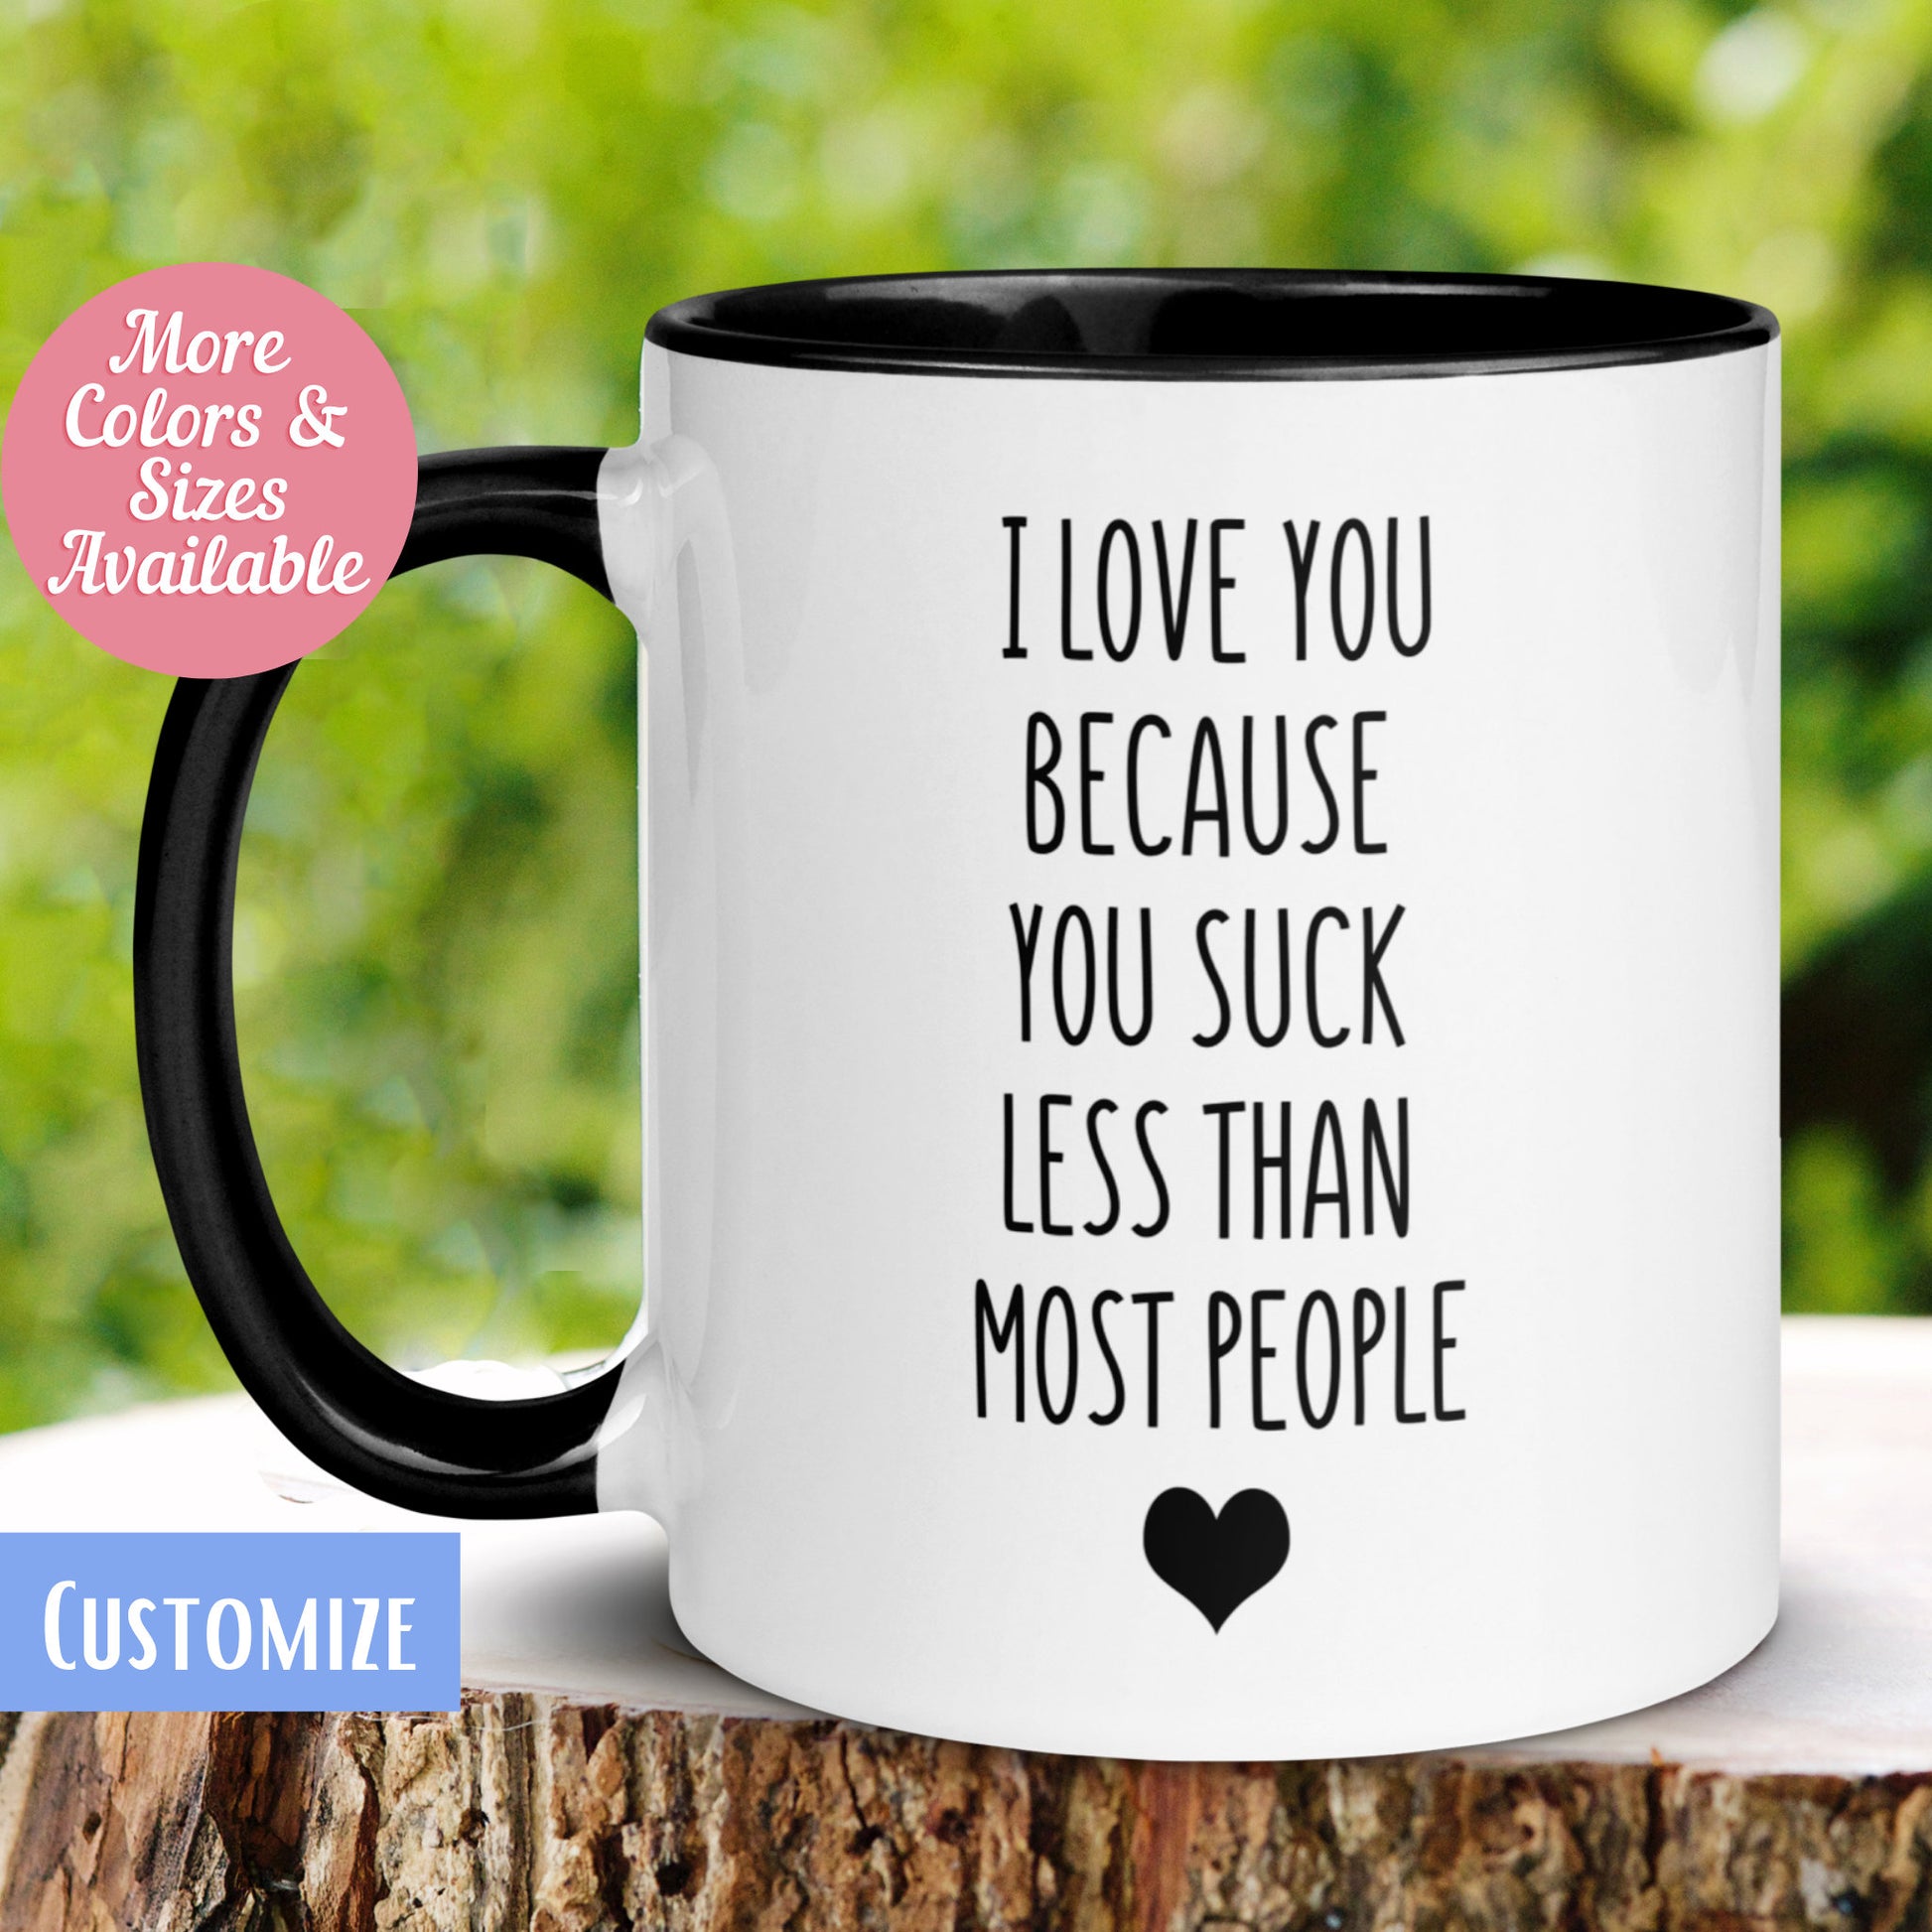 I Love You Mug, Because You Suck Less the Most People,  Love Gift, Gift for Her Him, Coffee Cup, Funny Valentine Birthday Gift, 438 Zehnaria